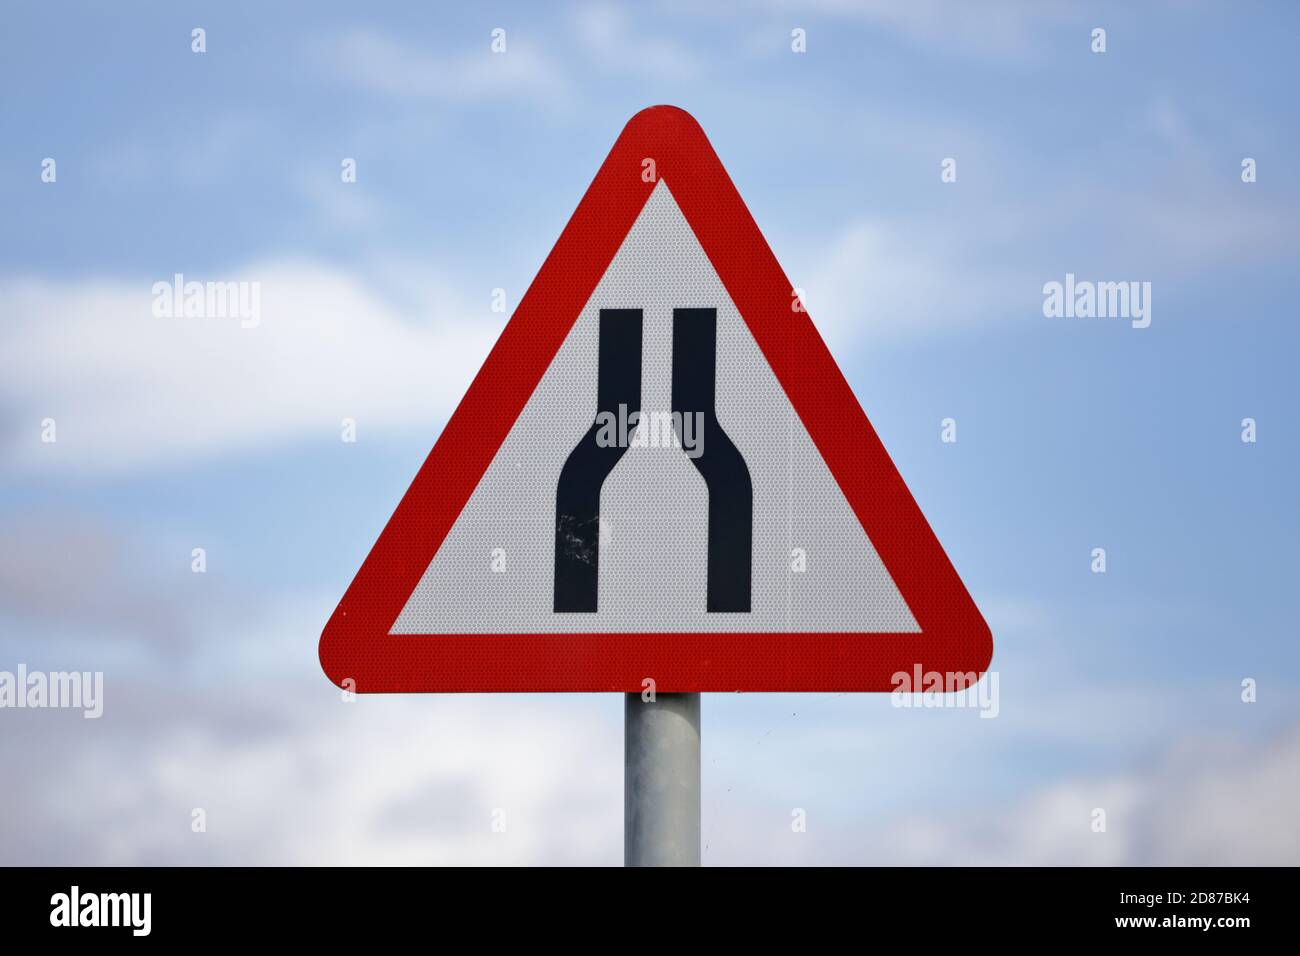 a triangular uk traffic sign mounted on a metal post giving advanced warning that the road narrows on both sides to increase the safety of road users Stock Photo